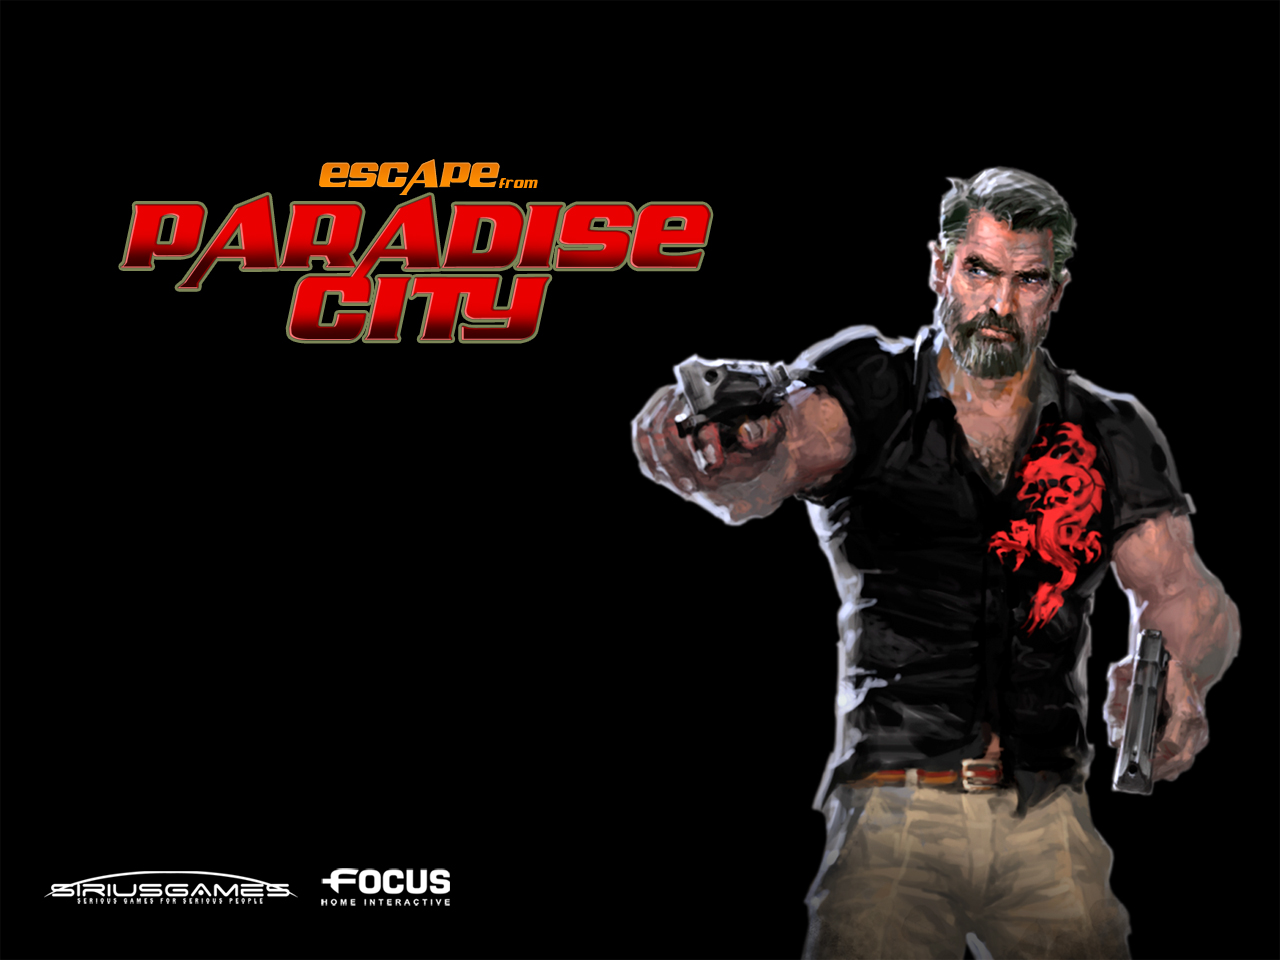 Escape_from_paradise_city_02_1280x960.jpg